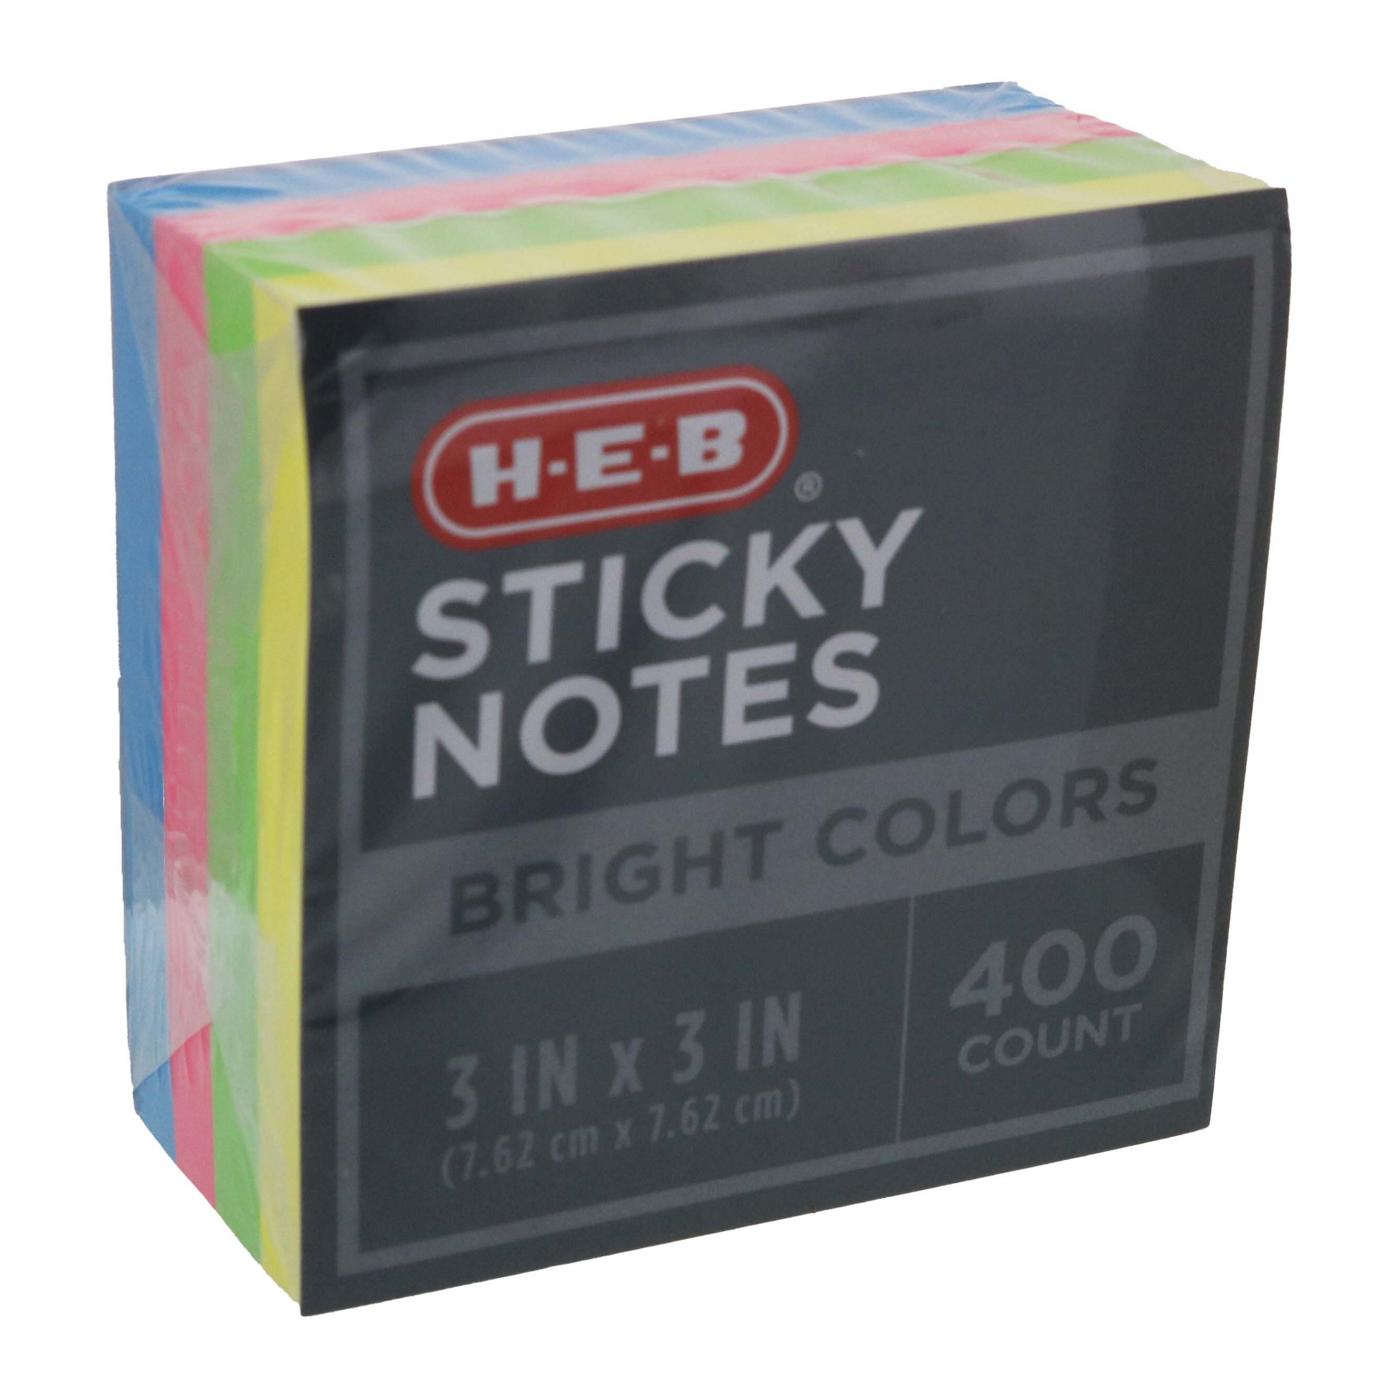 H-E-B Bright Colors Sticky Notes, 3"x3"; image 2 of 2